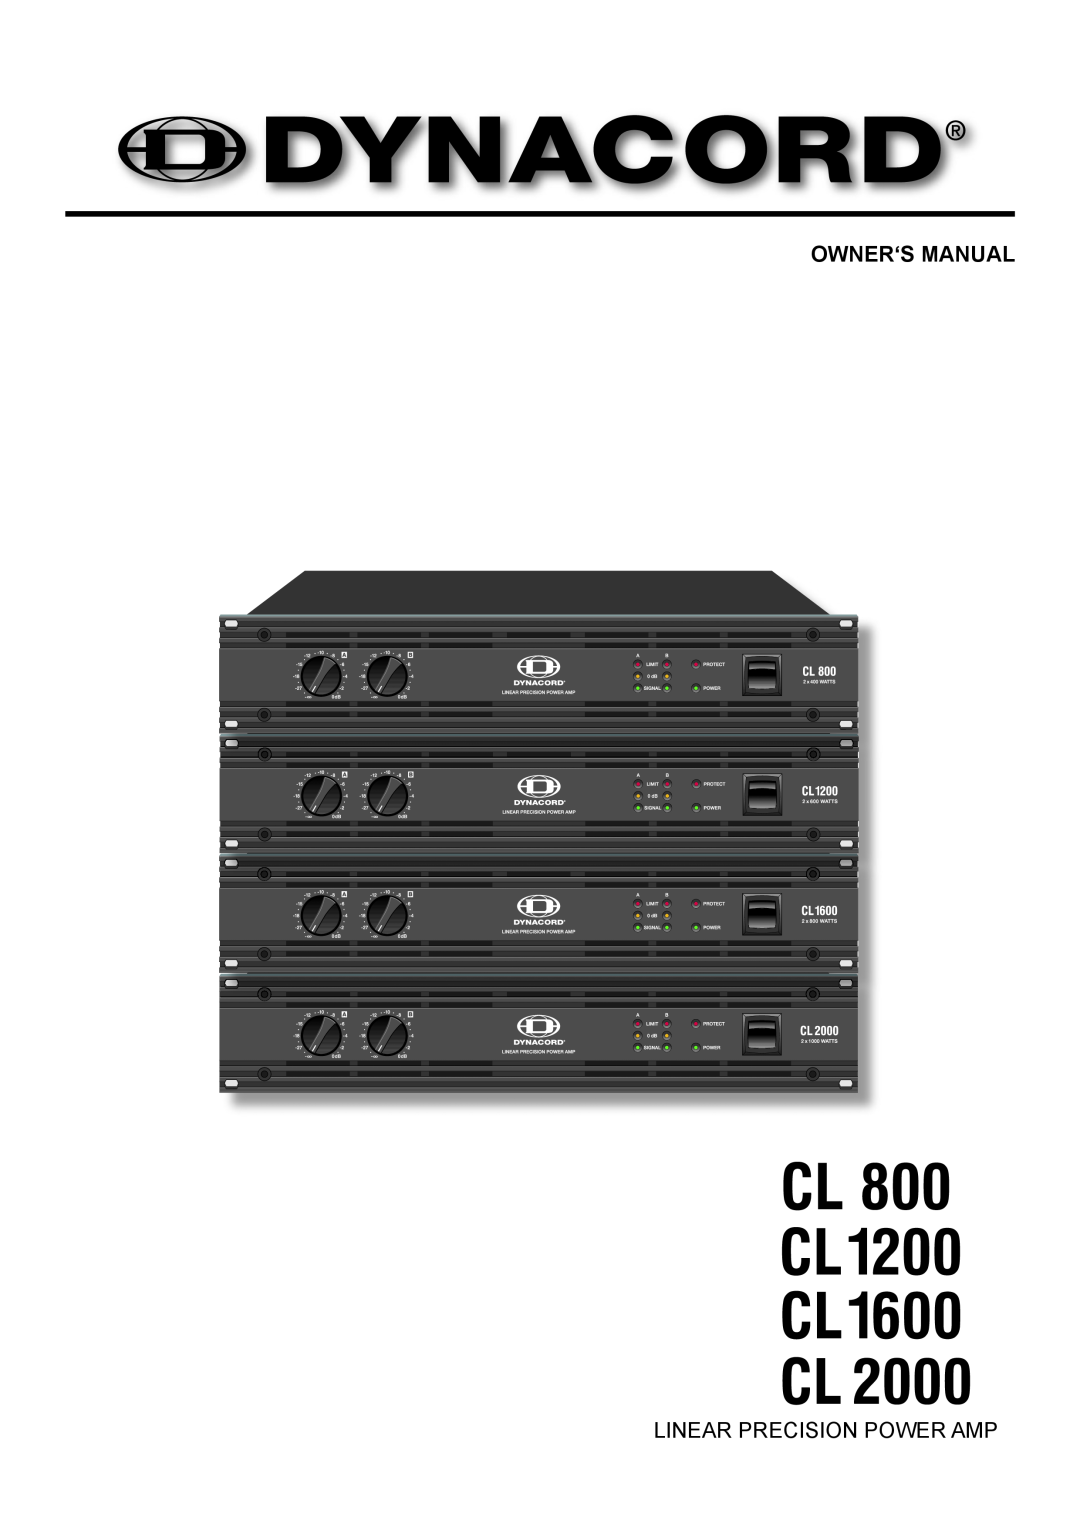 Dynacord CL 1200, CL 2000 owner manual Owner‘S Manual, Linear Precision Power Amp 